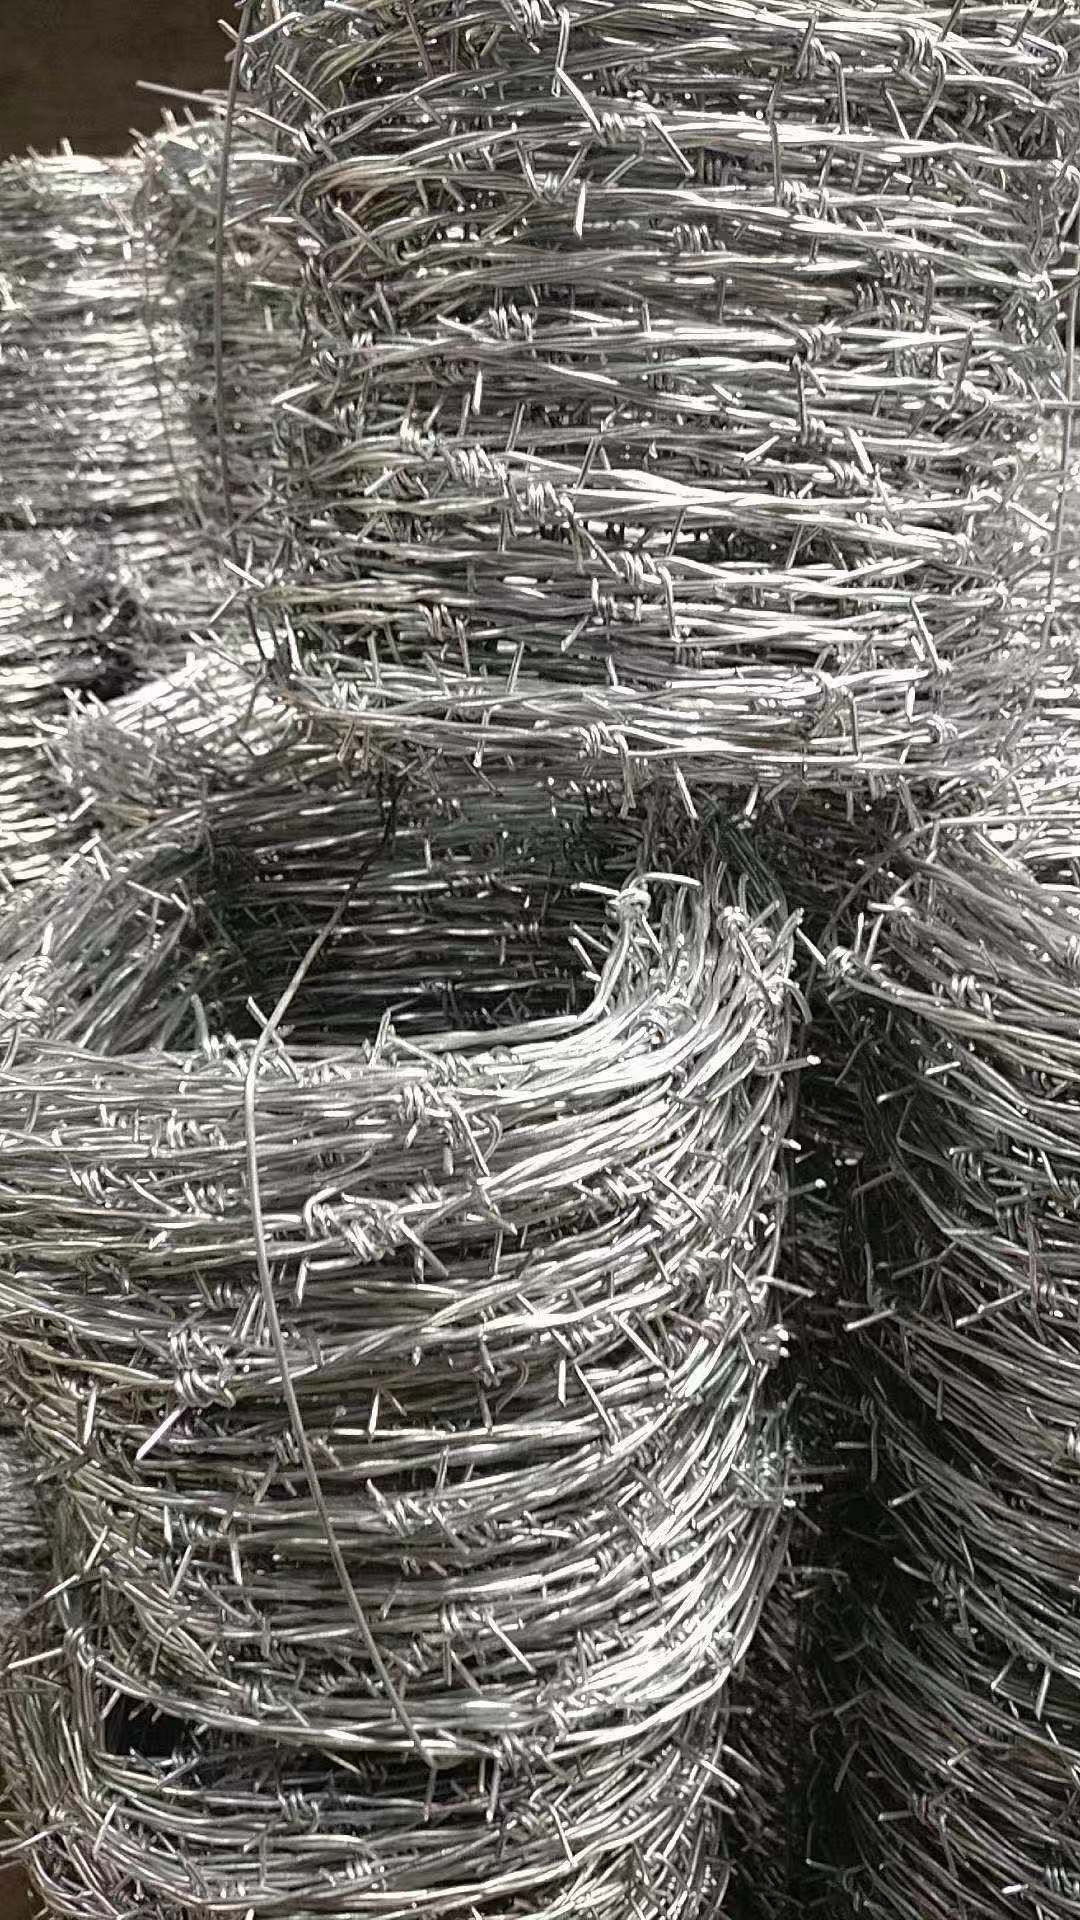 Highway Hot dipped galvanized barbed wire fence wire double strand double twisted barbed wire